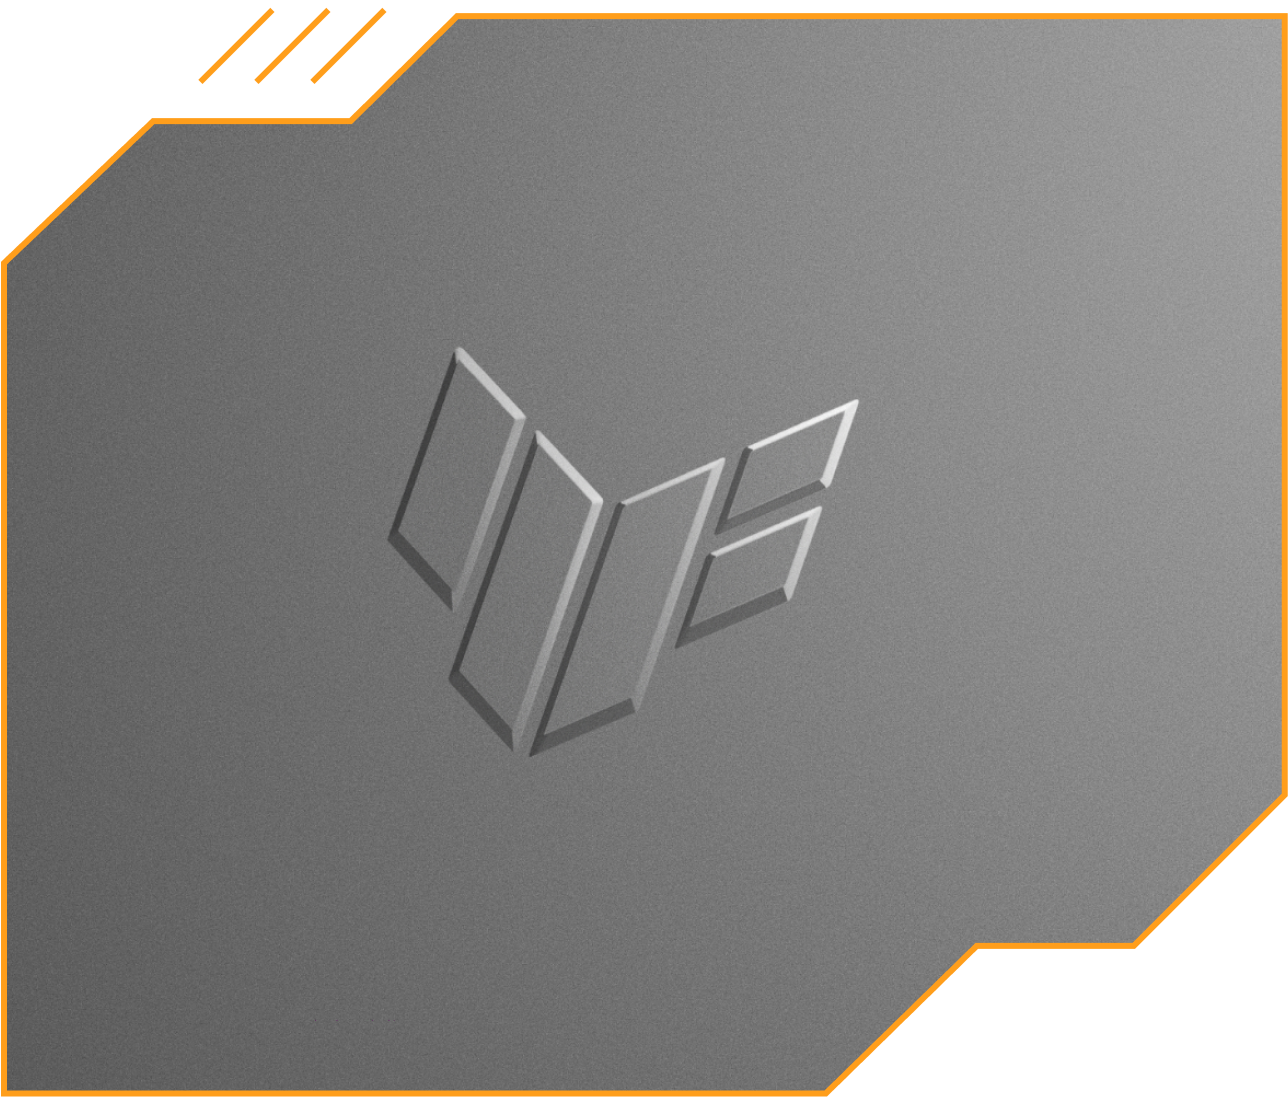 Extreme close-up view of the TUF Gaming logo.